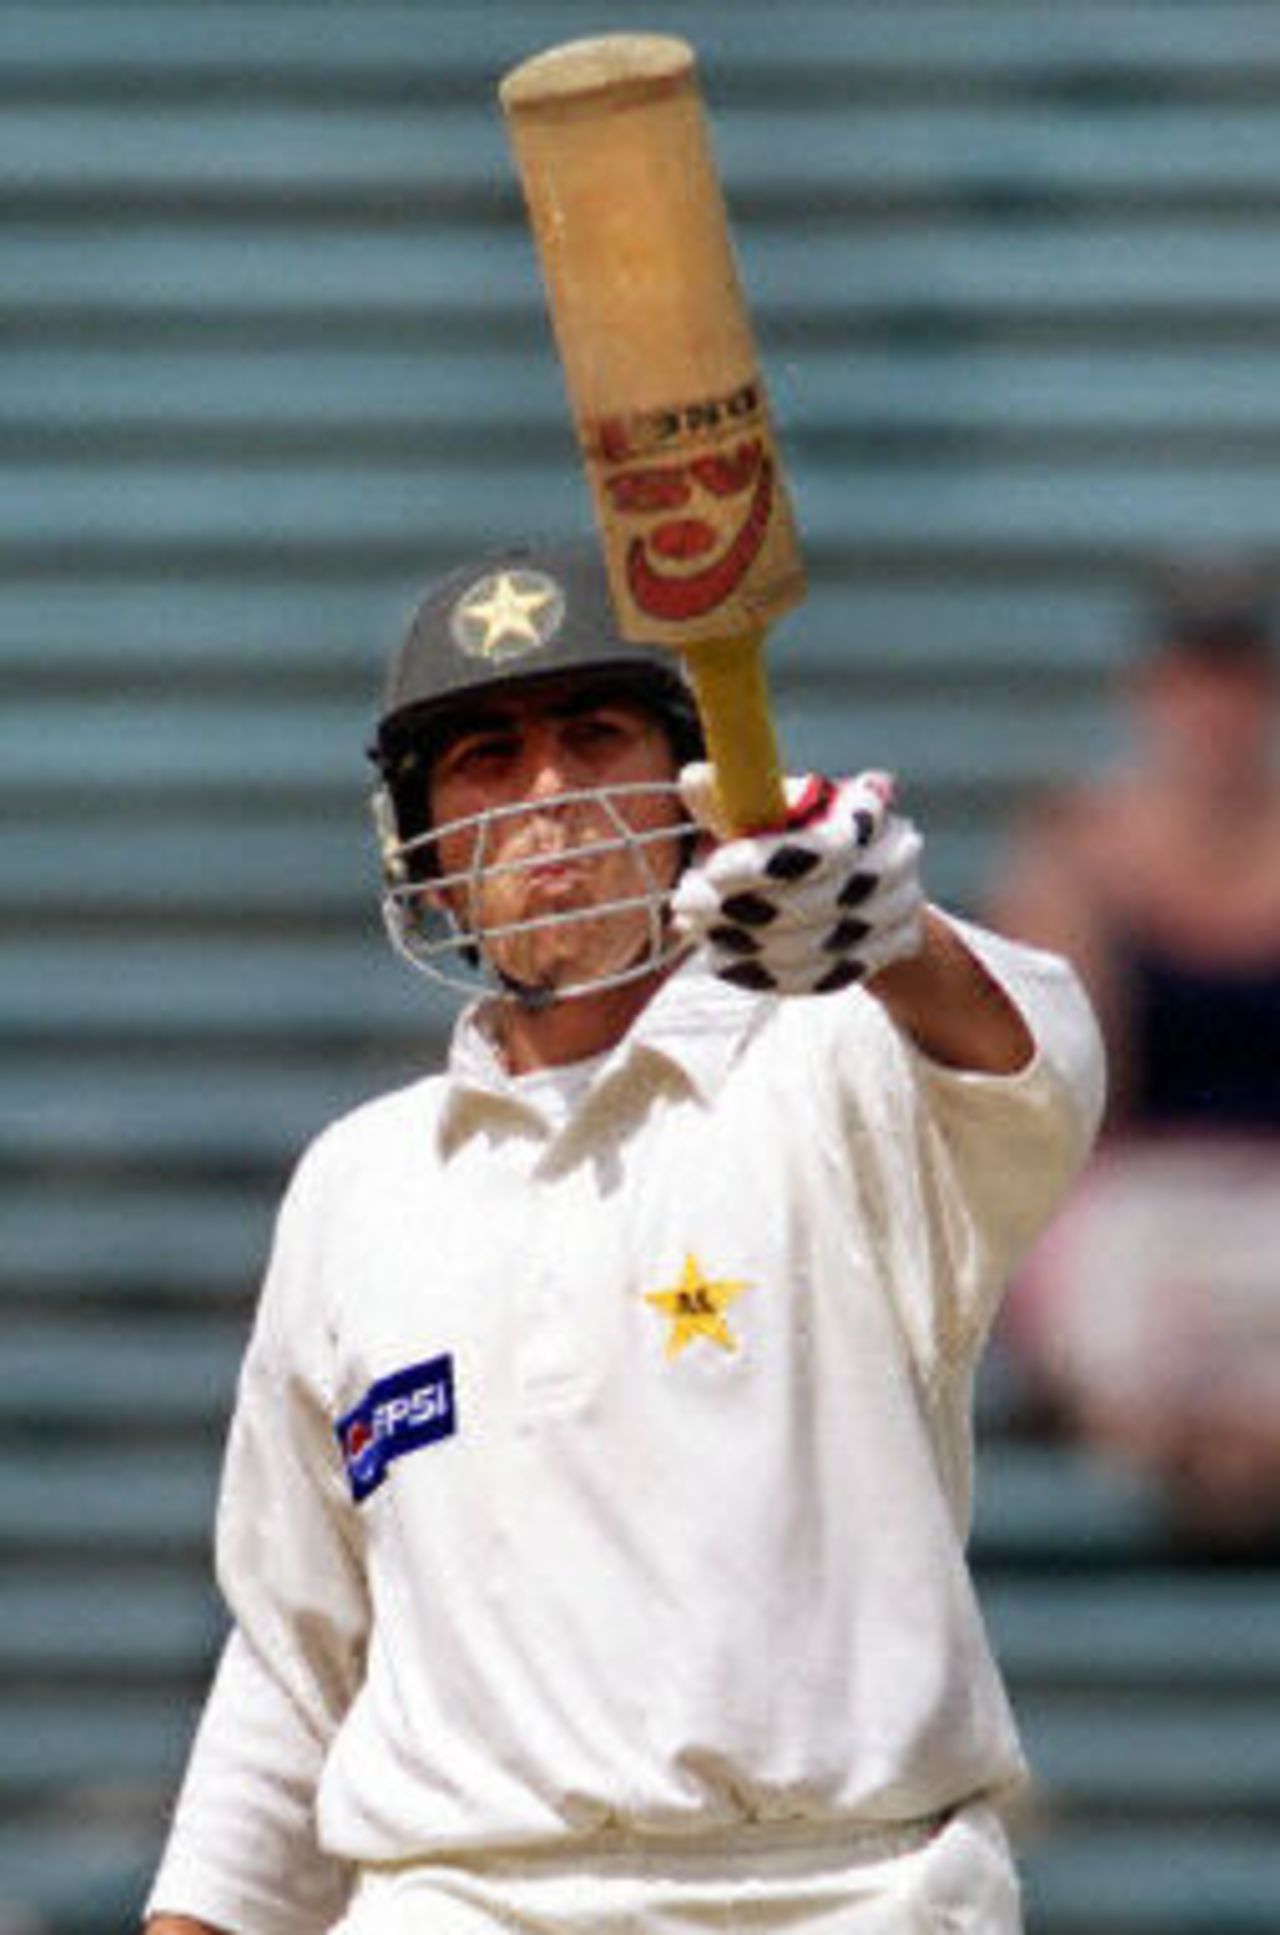 Younis Khan acknowledges the applause after scoring his century, day 4, 1st Test at Eden Park in Auckland, 8-12 March 2001.